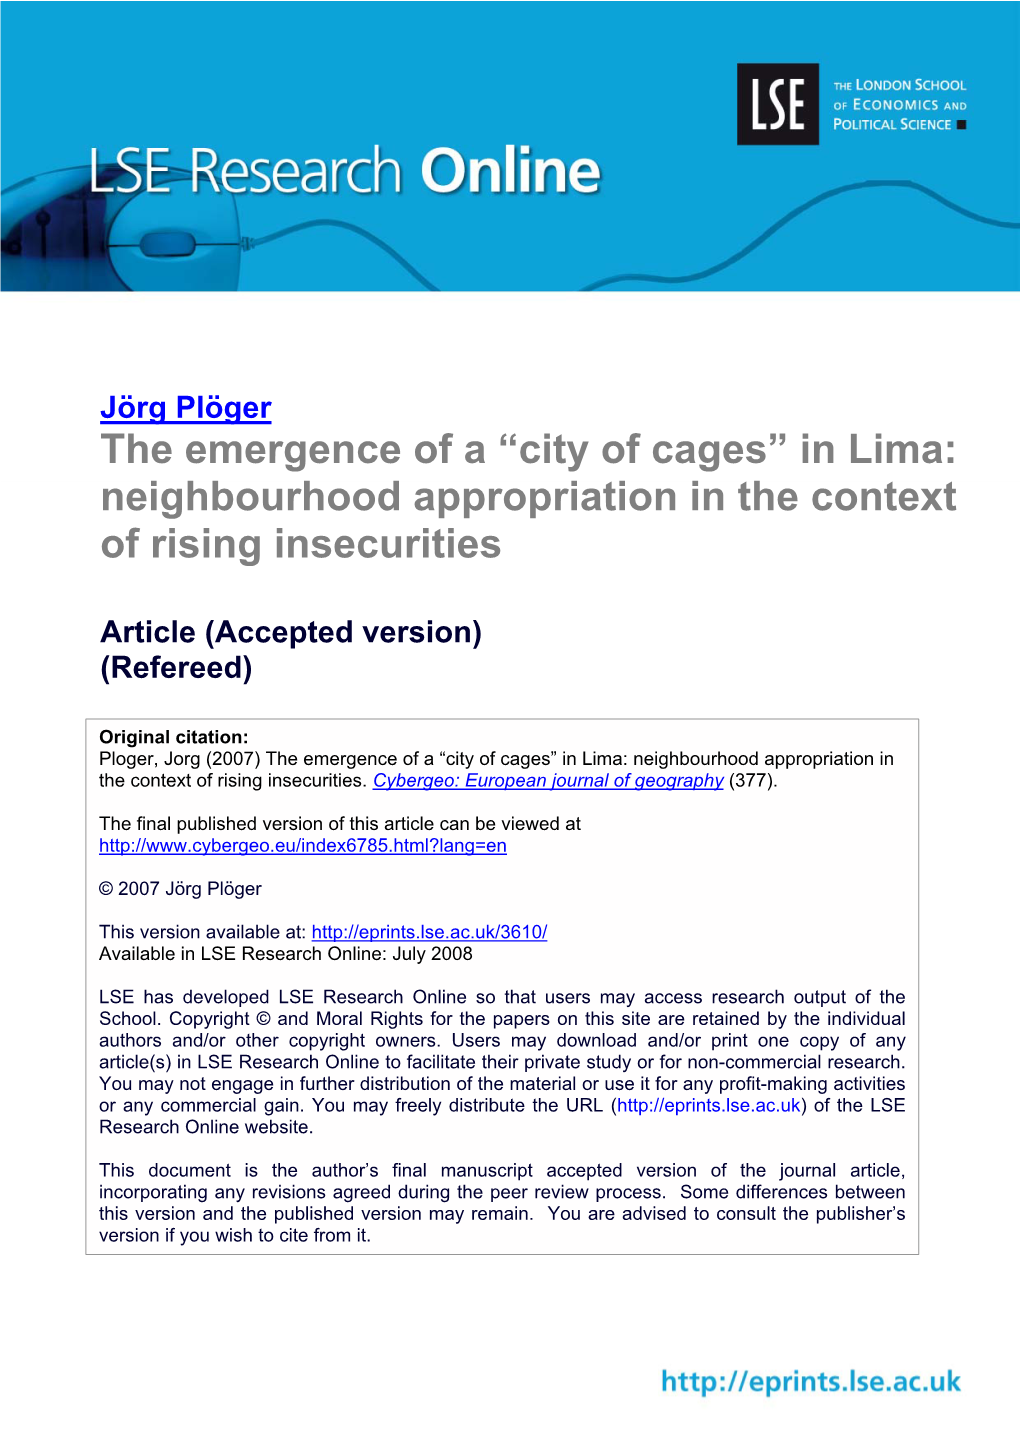 “City of Cages” in Lima: Neighbourhood Appropriation in the Context of Rising Insecurities